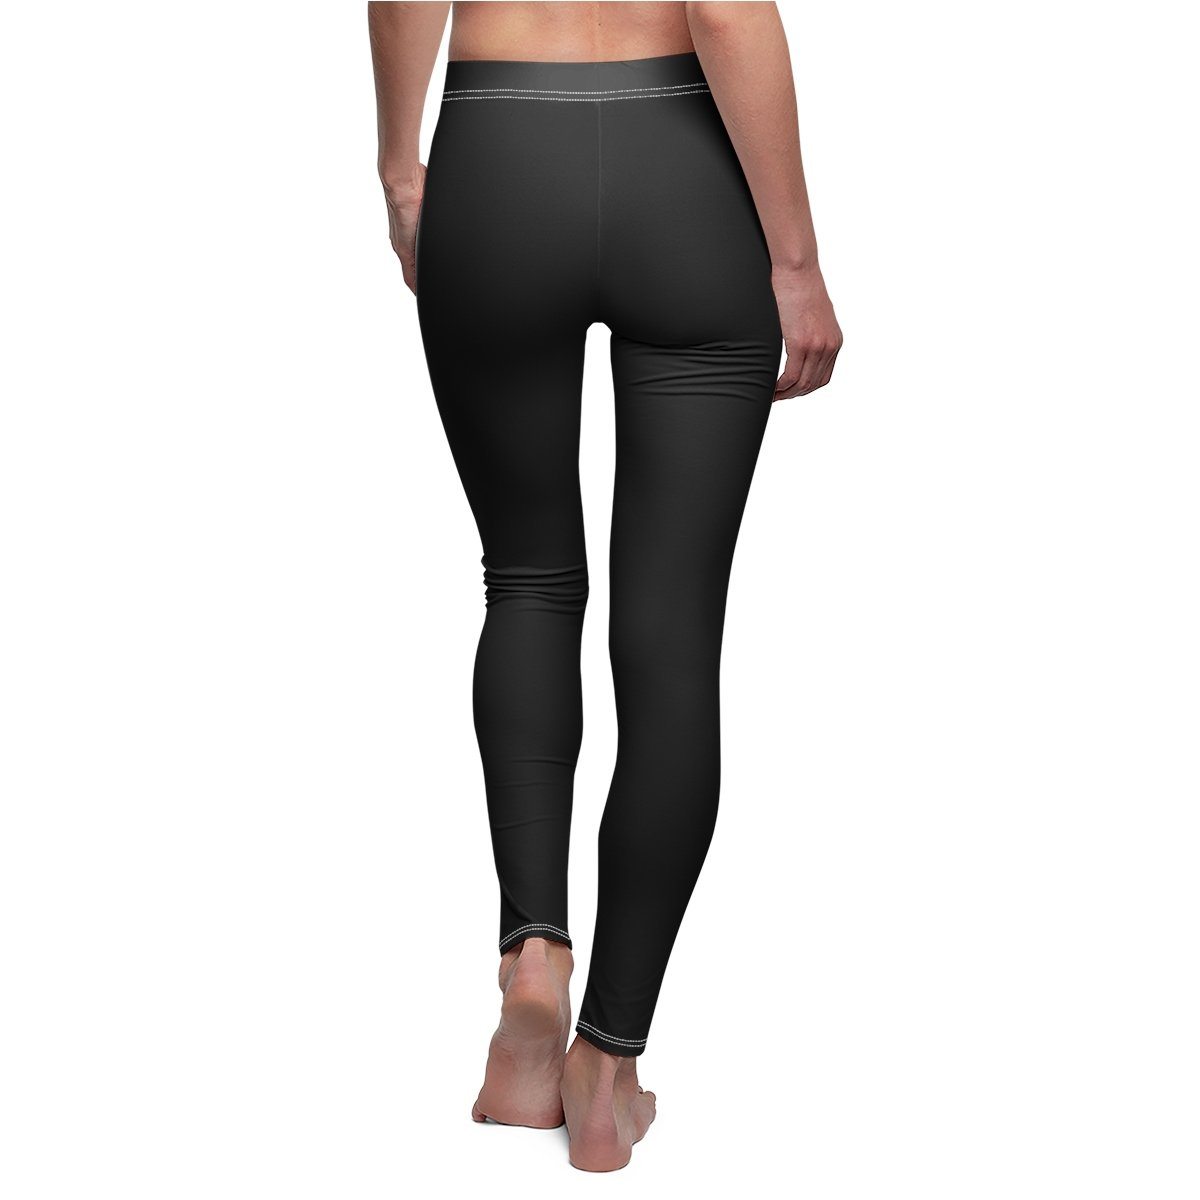 Bracket - V.4 - Extreme Sportswear Cut & Sew Leggings Template-Photoshop Template - Photo Solutions